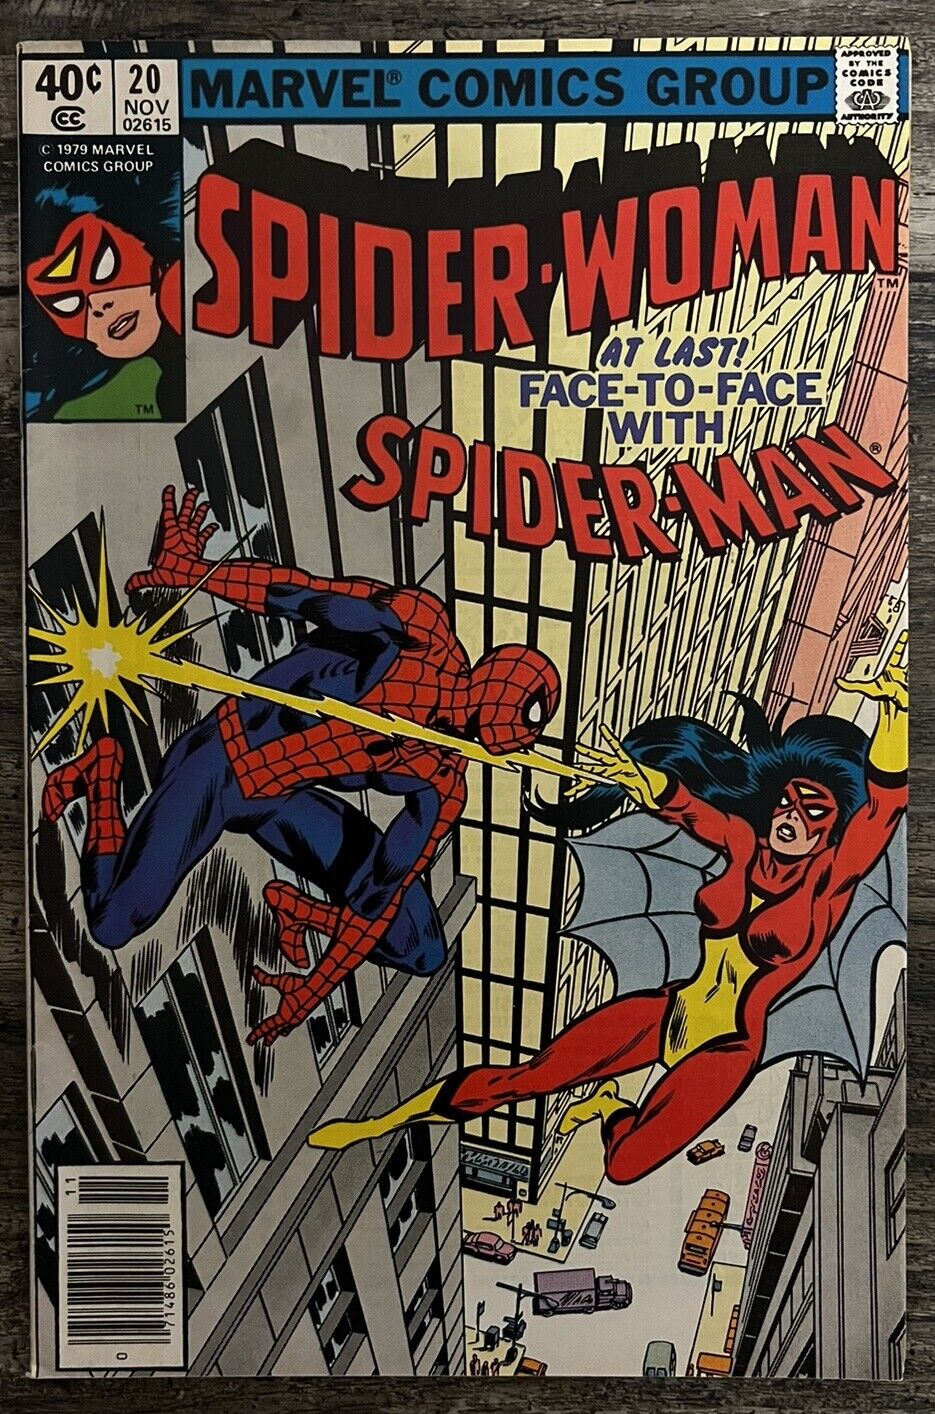 Spider-Woman #20  1st Battle With Spider-Man - Marvel Comics - Clean Copy - Key